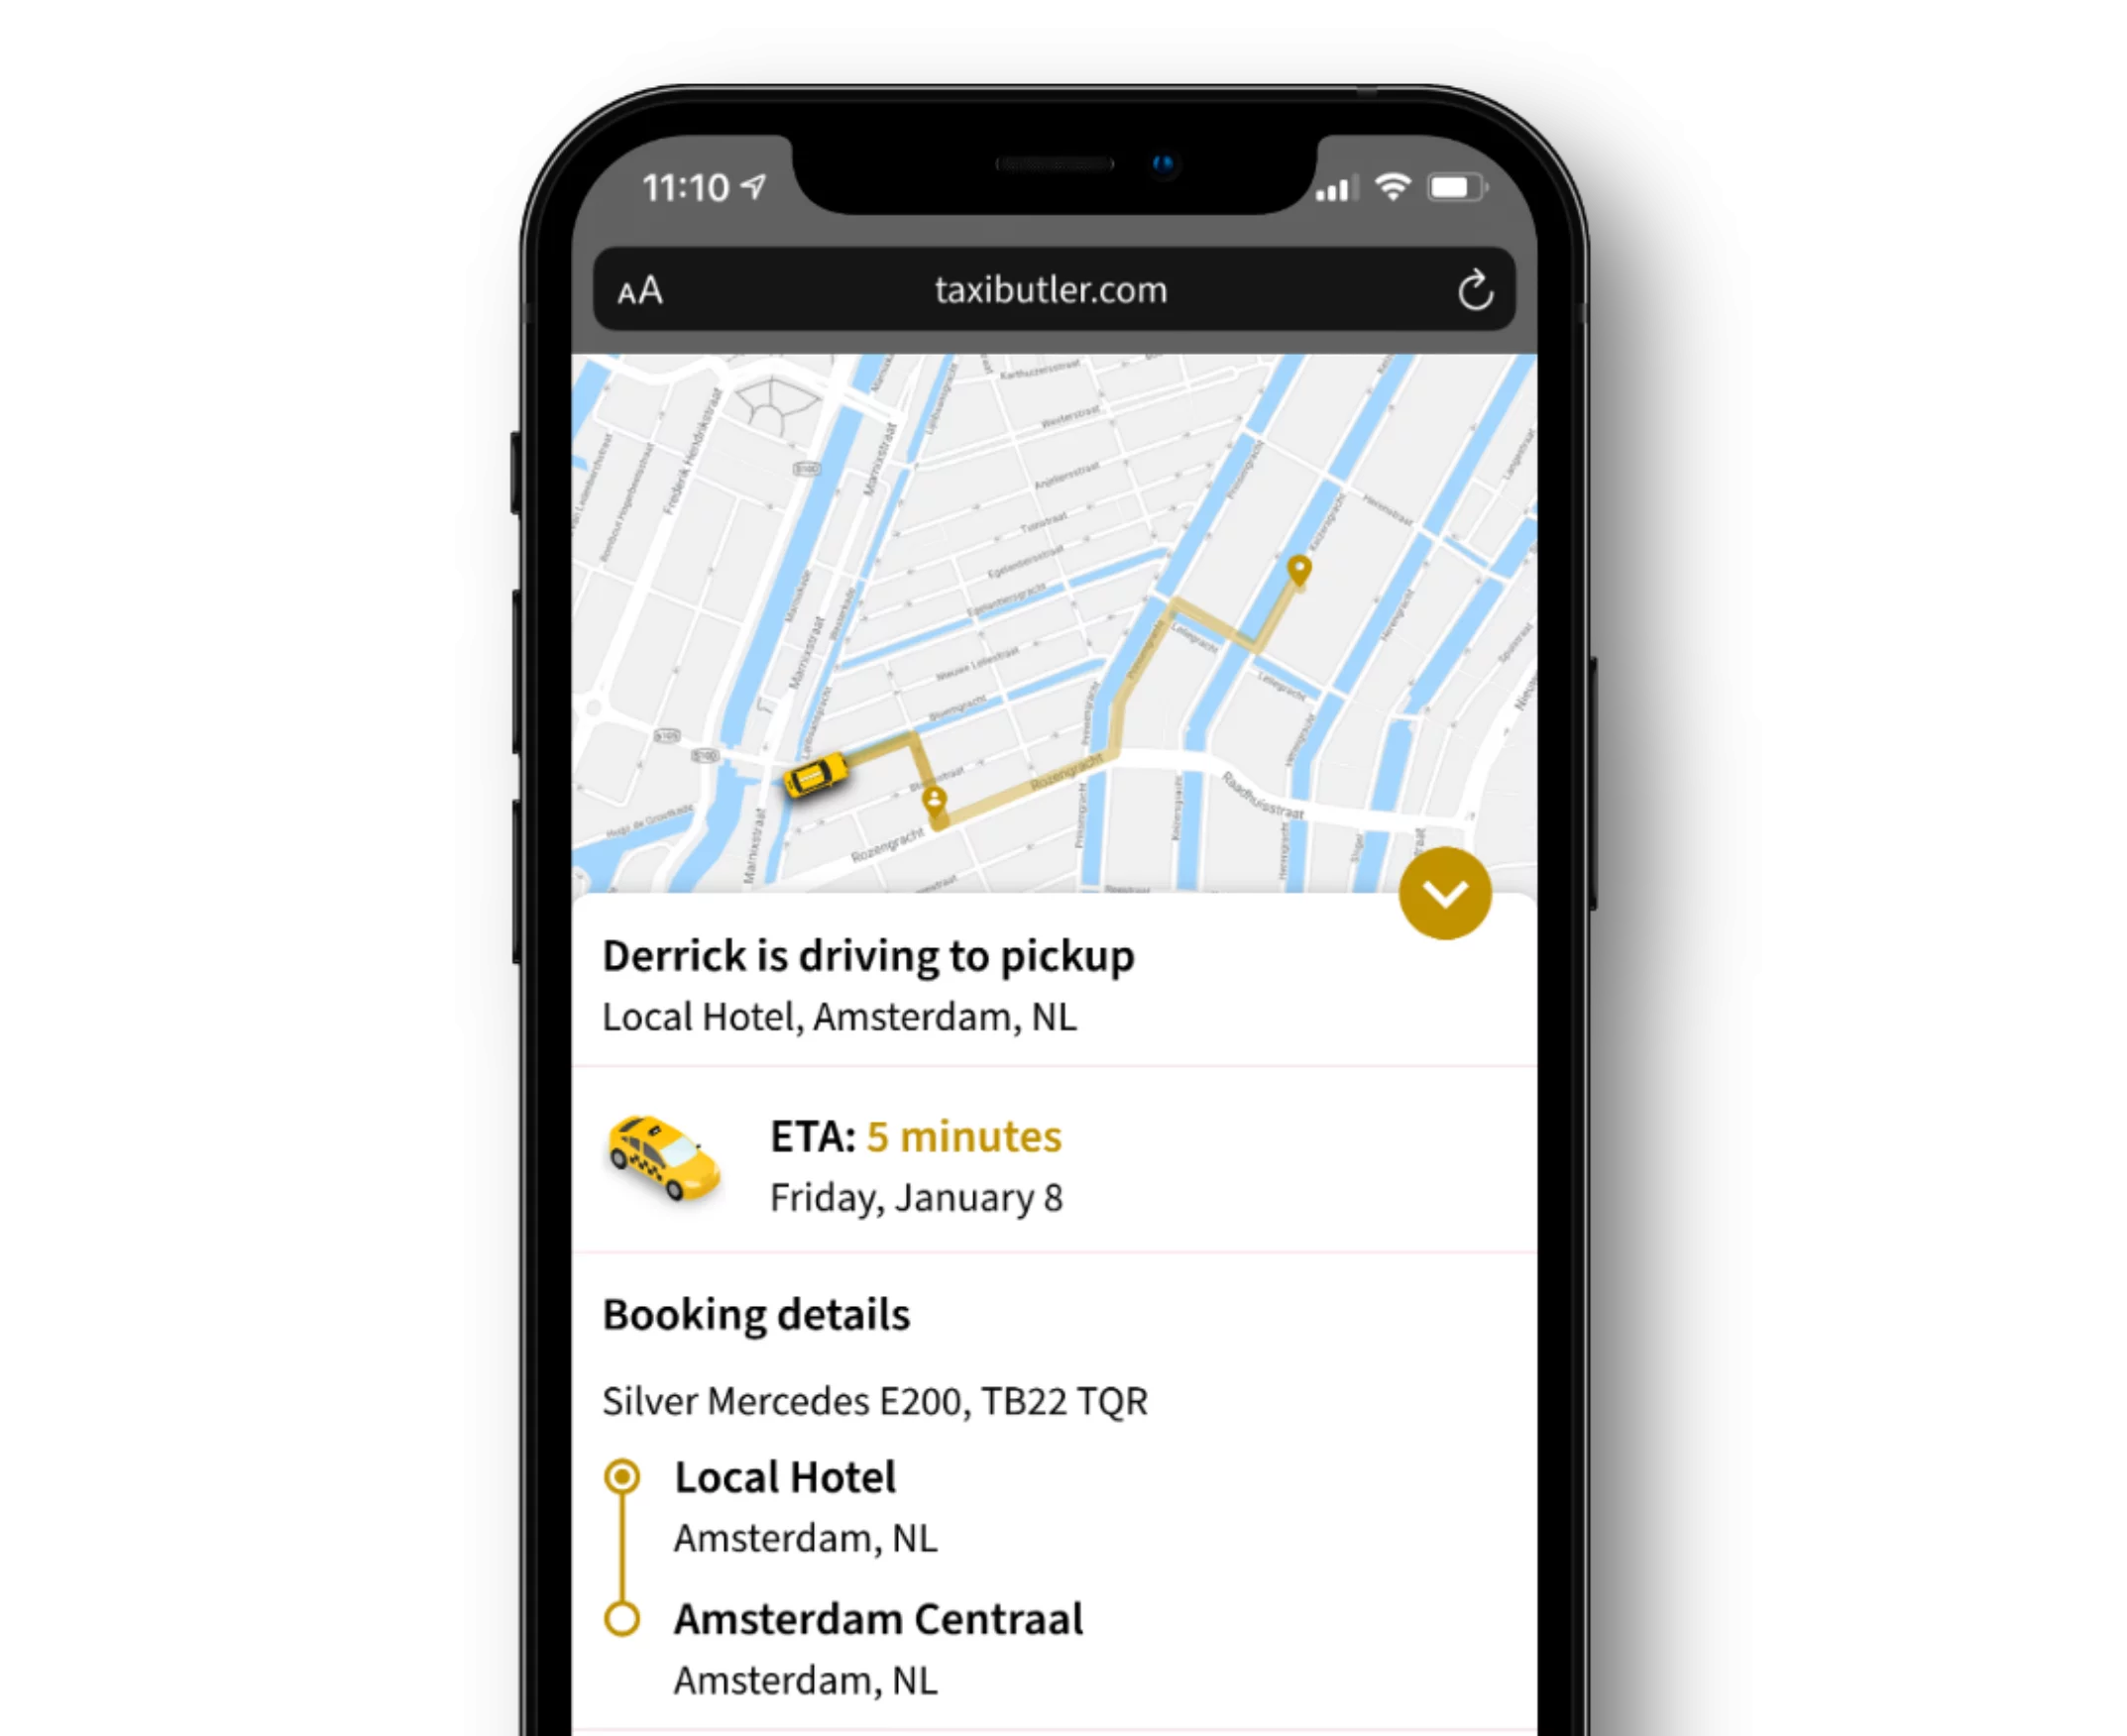 Taxi Butler QR tracking a taxi in the booking interface